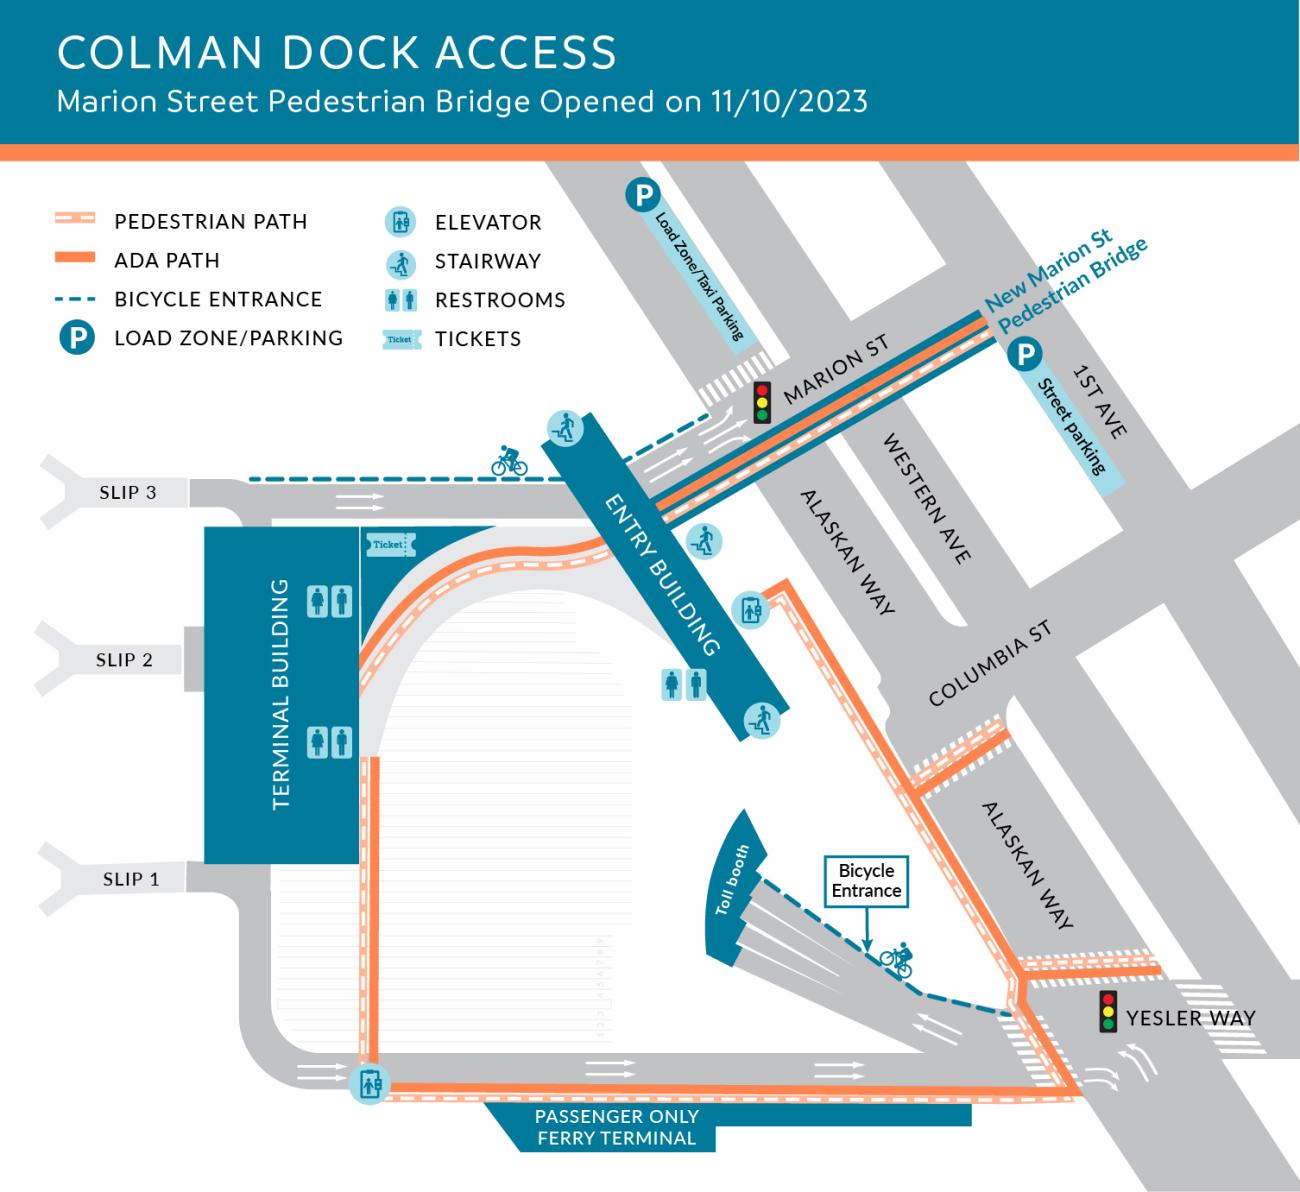 Map showing access routes to Colman Dock